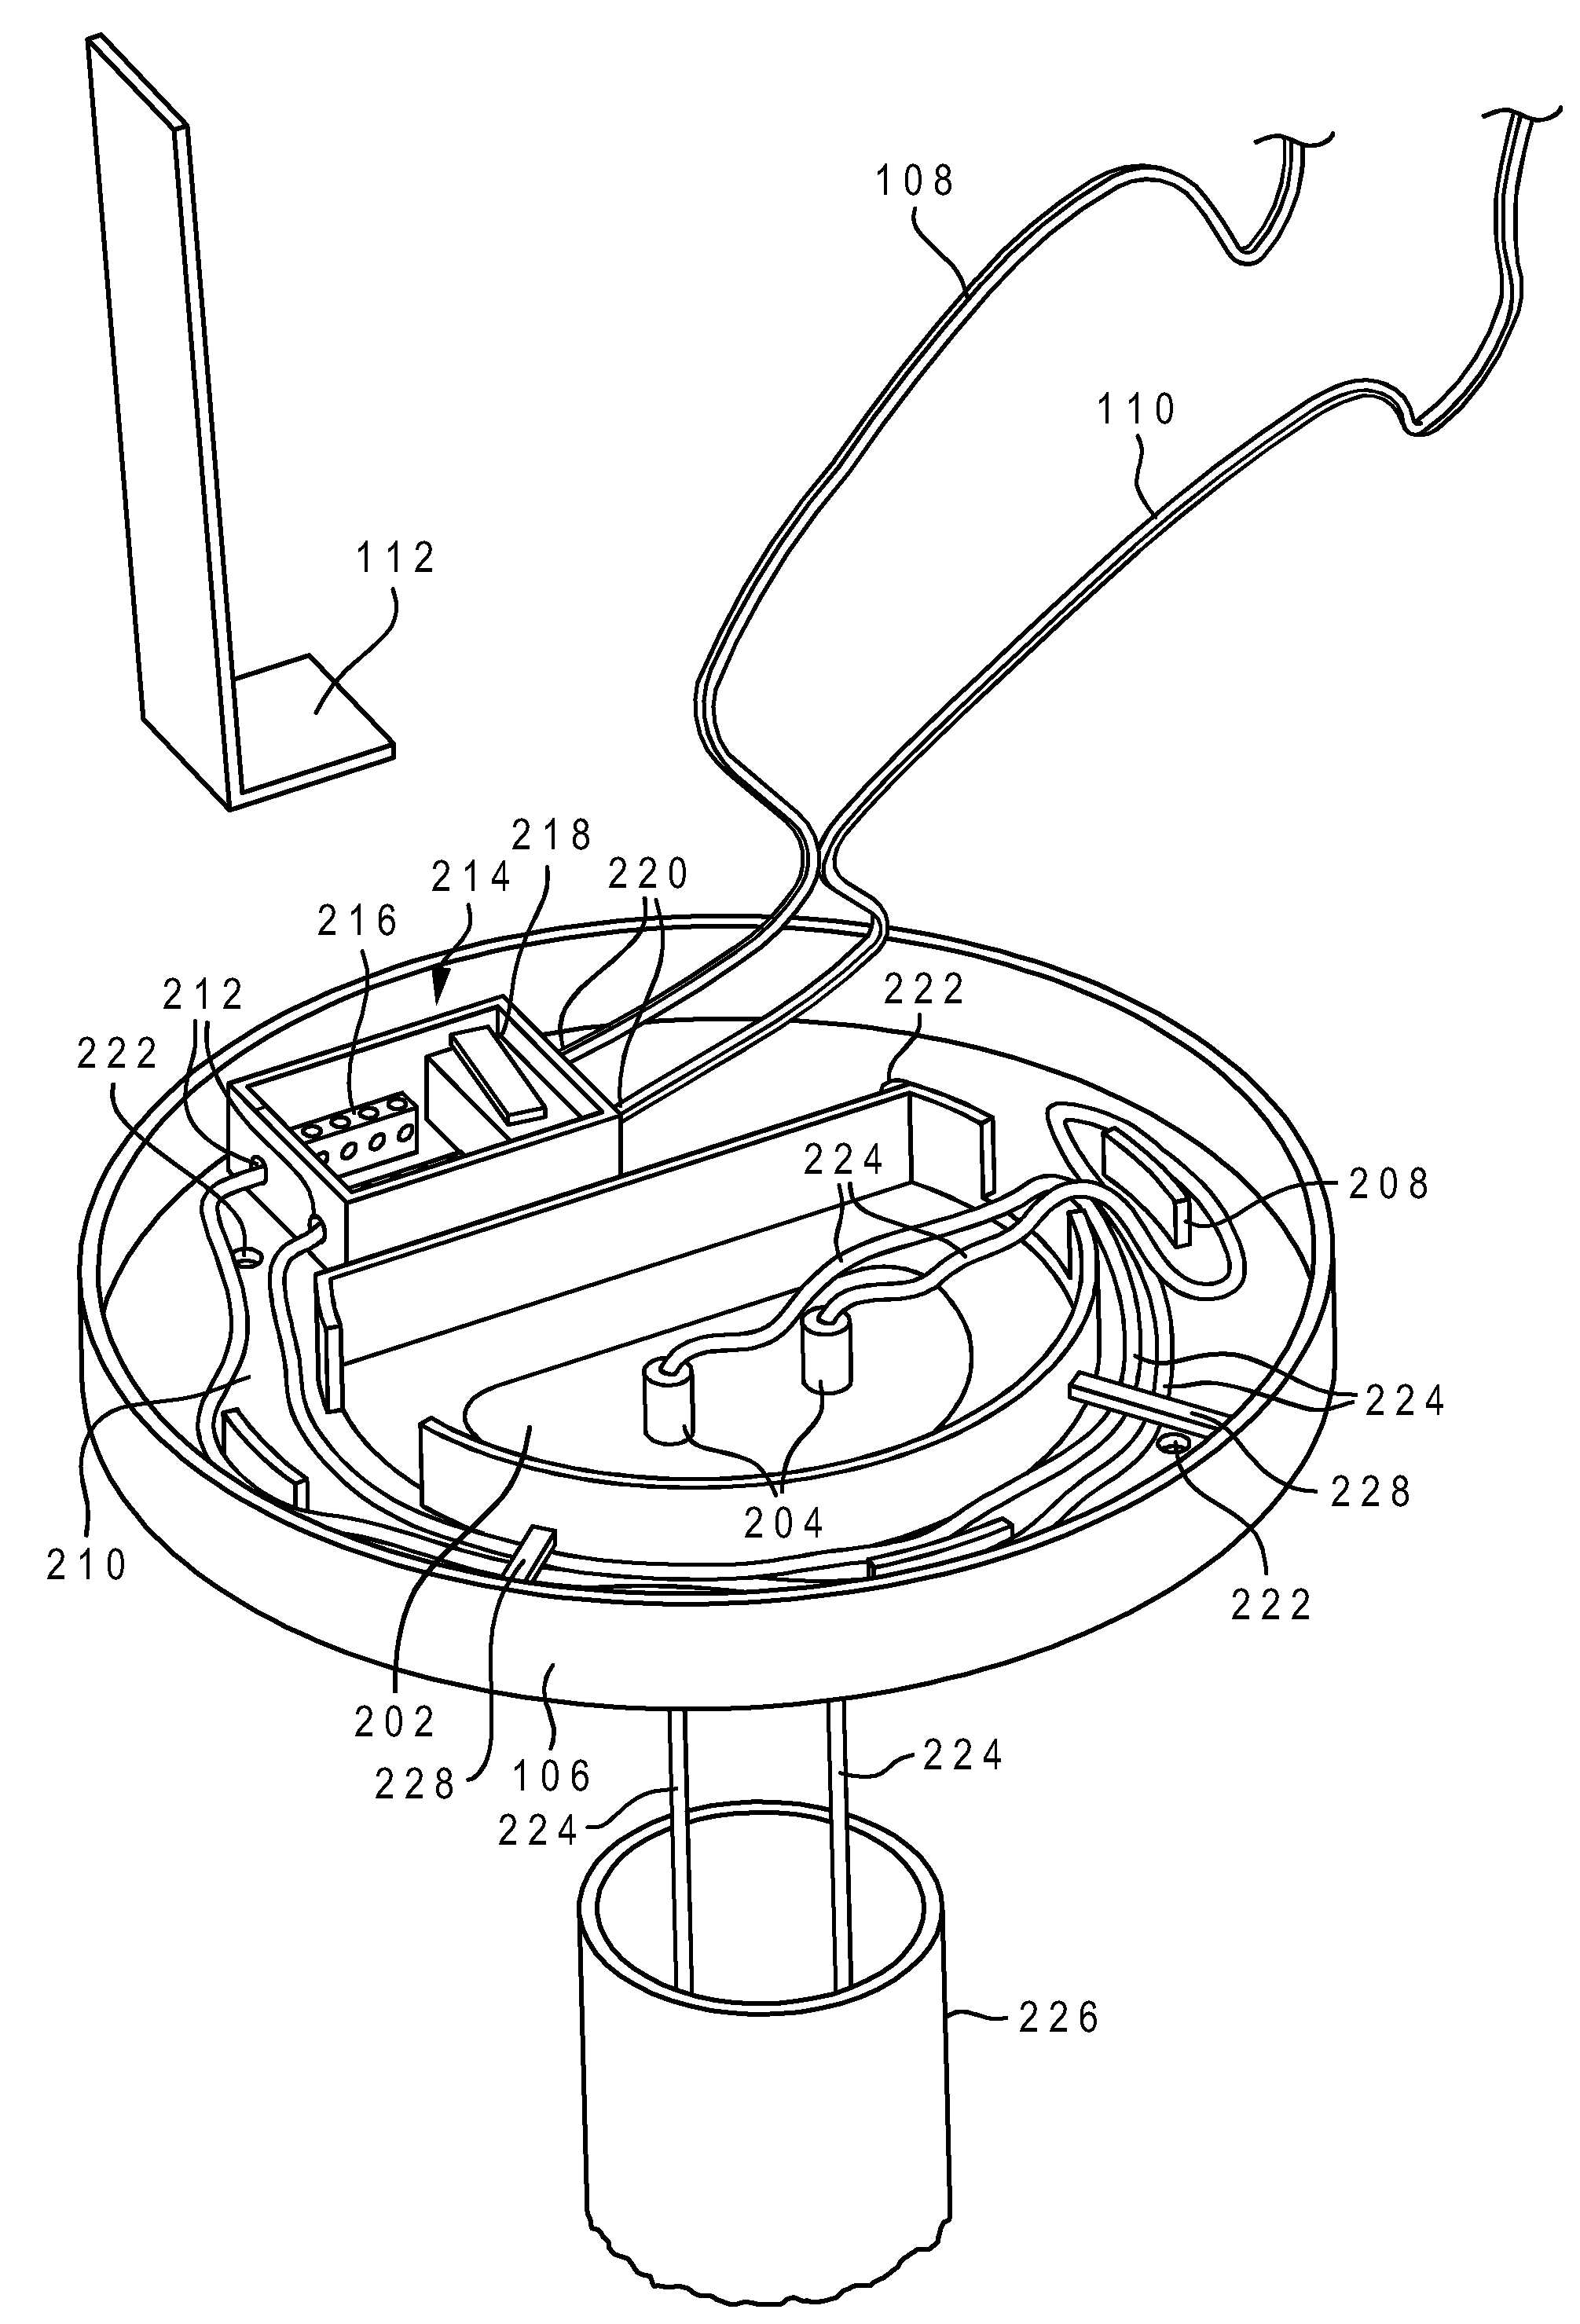 Break away base for electrical device